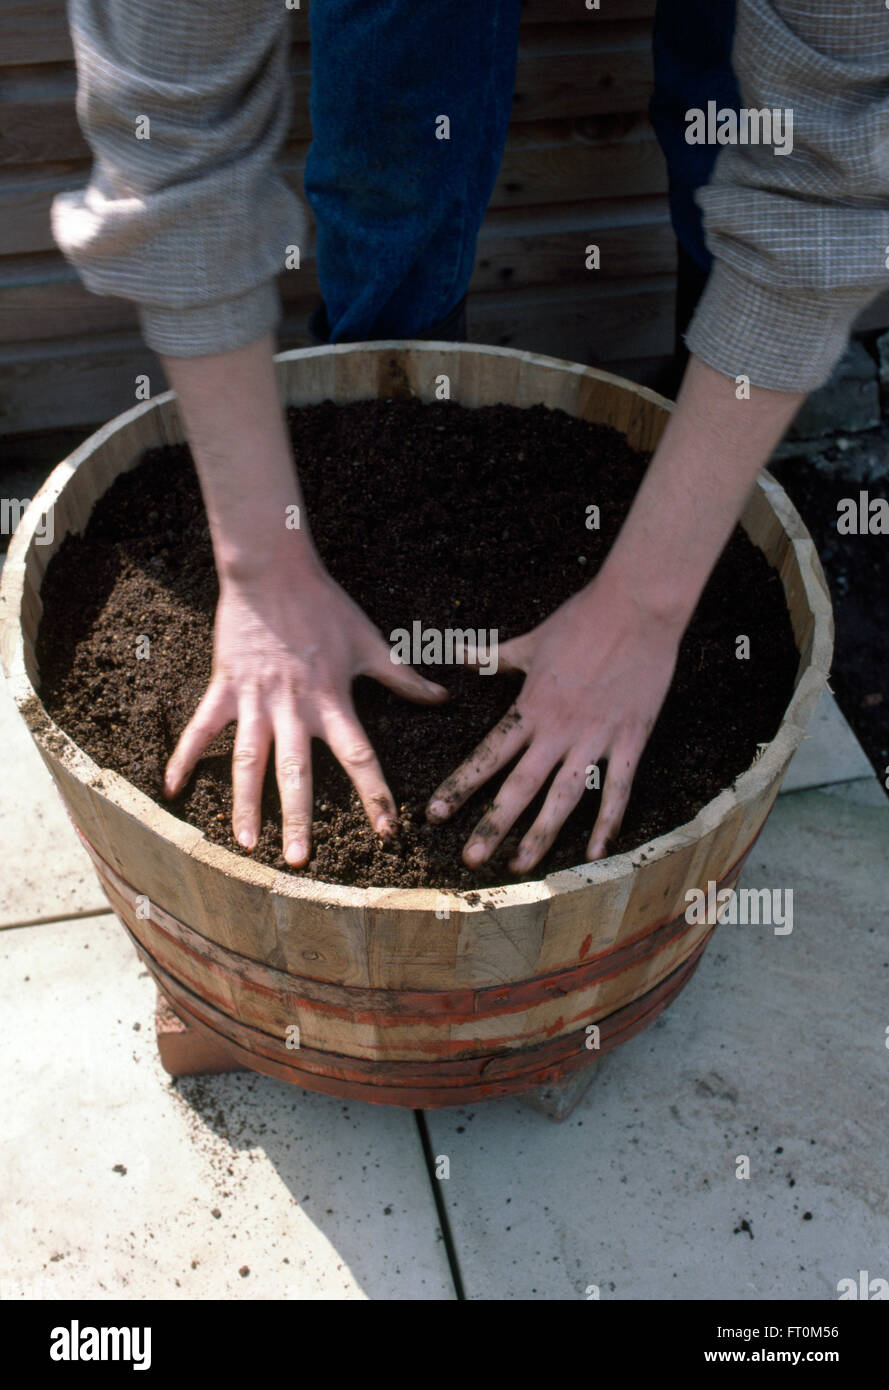 Close-up of a gardener flattening down compost in a wooden barrel Stock Photo